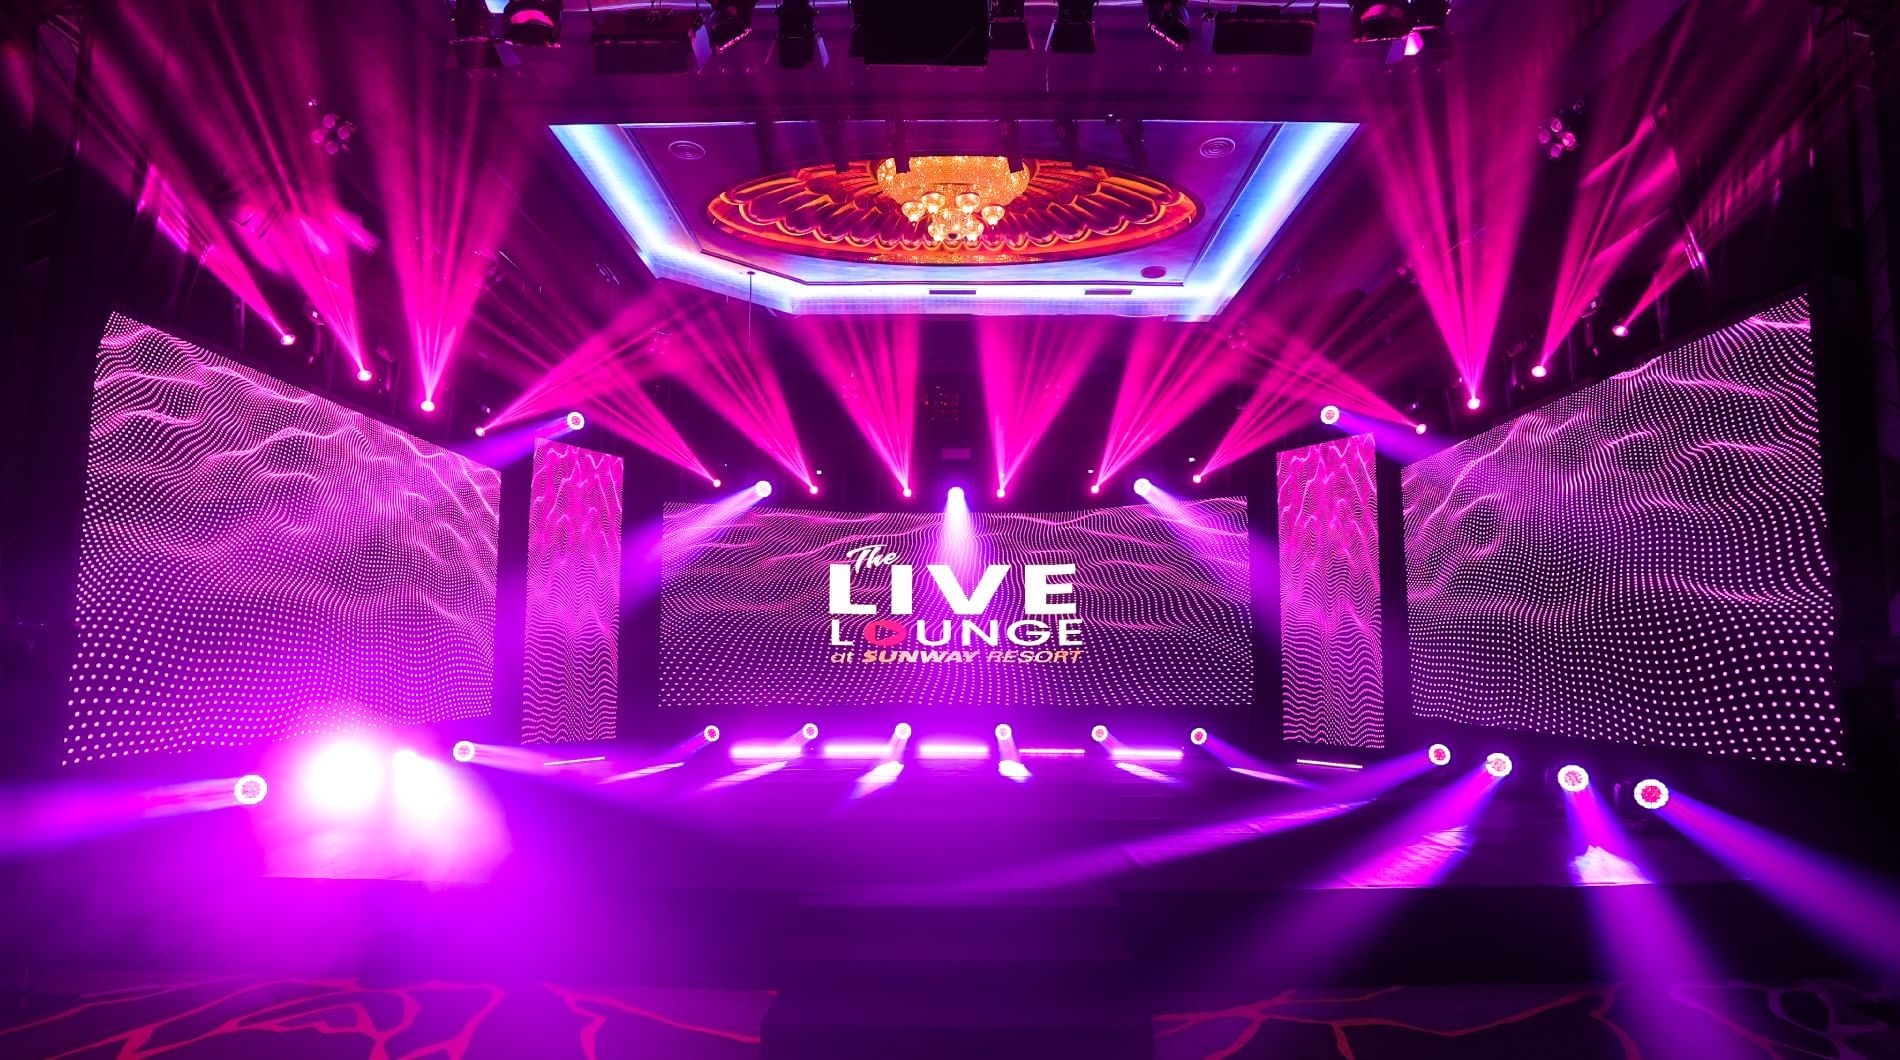 Stage lighting for The Live Lounge at Sunway Hotel Pyramid